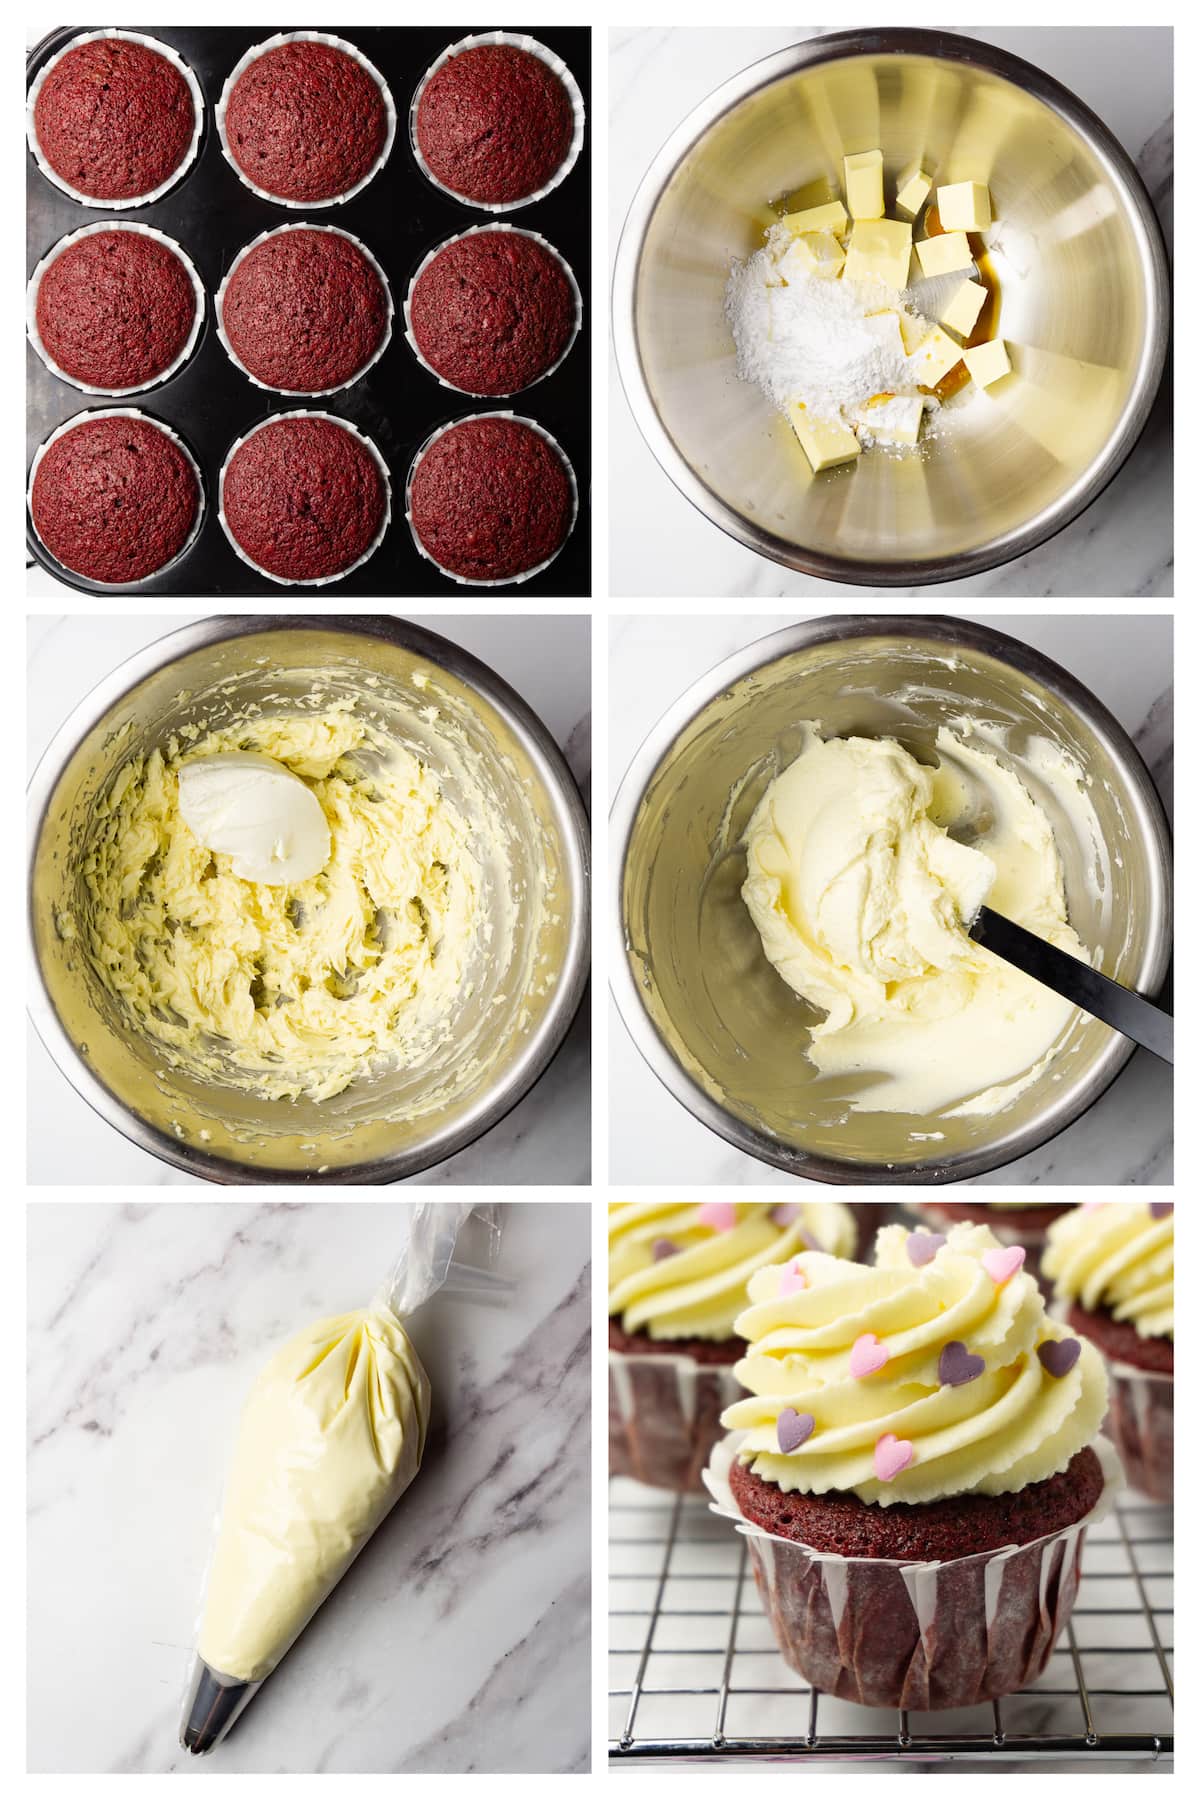 Collage image showing six steps to make bake and decorate red velvet cupcakes.